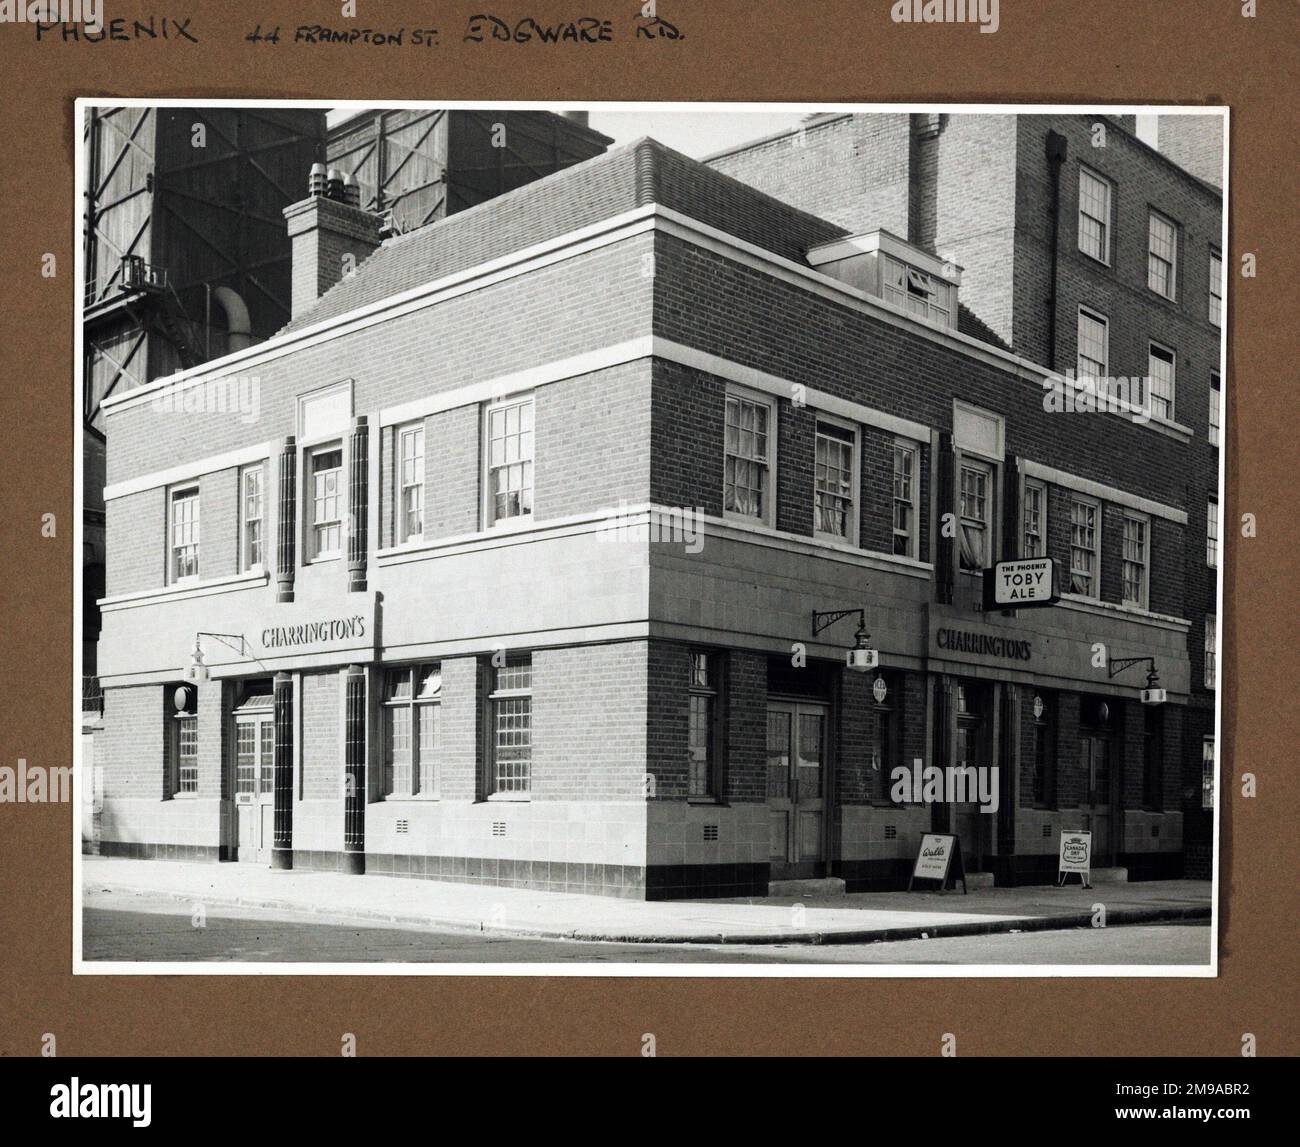 Photograph of Phoenix PH, Edgware, London. The main side of the print (shown here) depicts: Corner on view of the pub.  The back of the print (available on request) details: Nothing for the Phoenix, Edgware, London NW8 8LE. As of July 2018 . Closed and replaced with flats Stock Photo